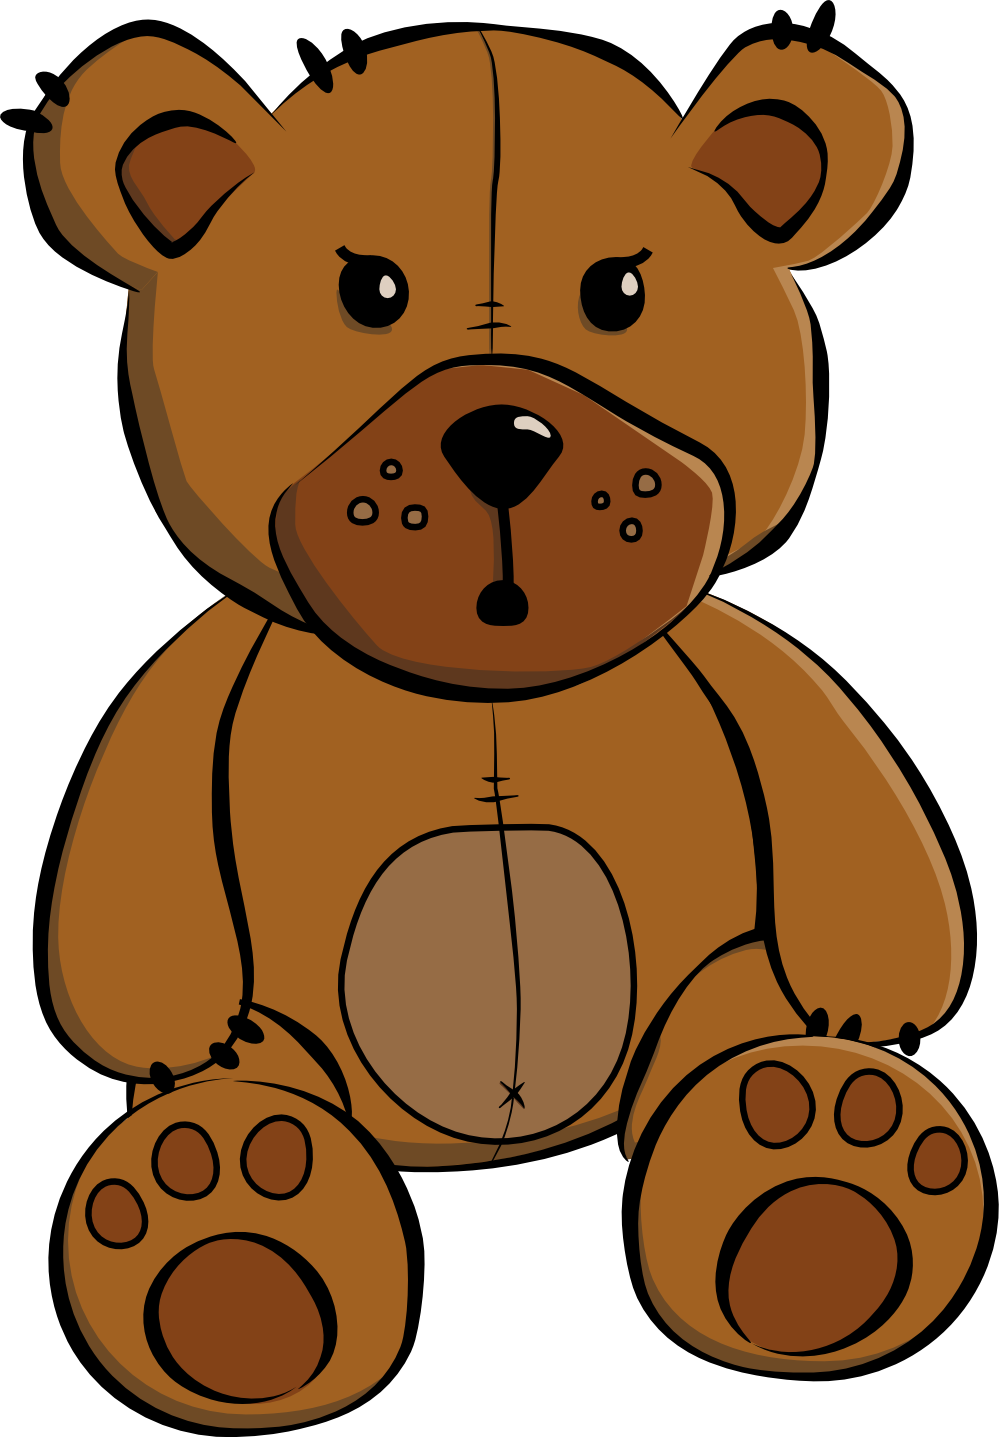 Teddy bear clipart free clipart images 7